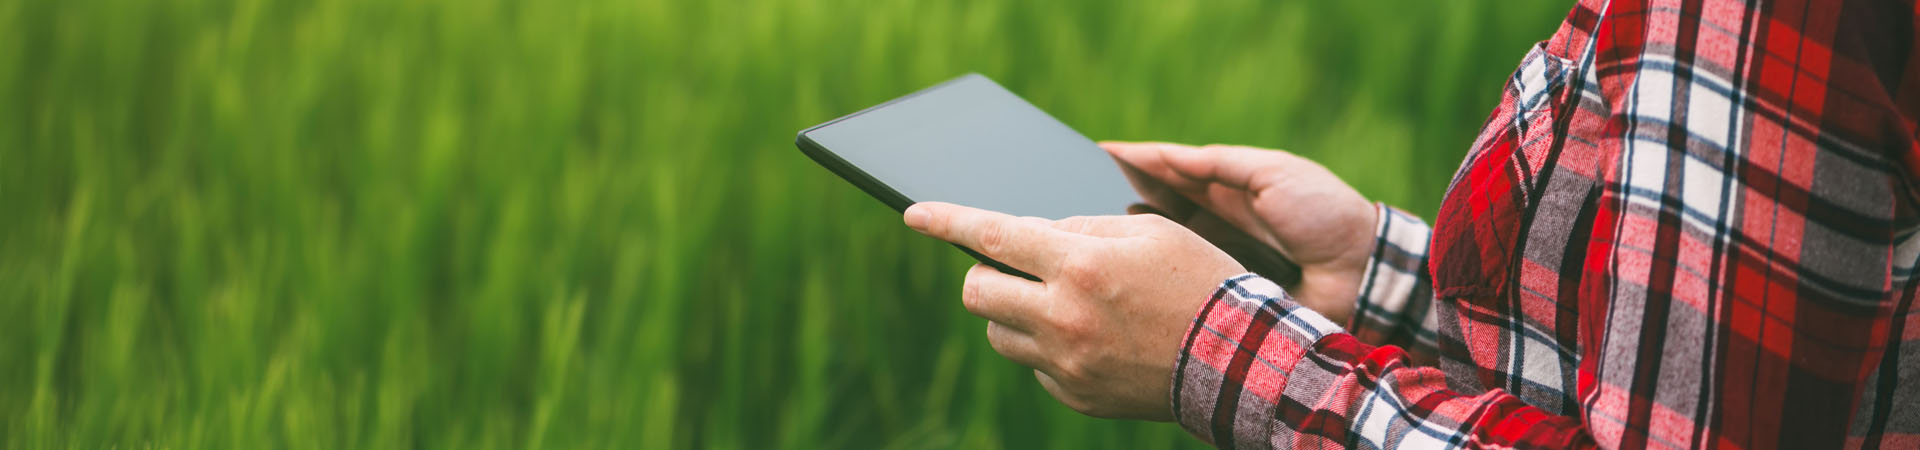 Development of a Cross-platform Mobile App for an Agrochemical Company